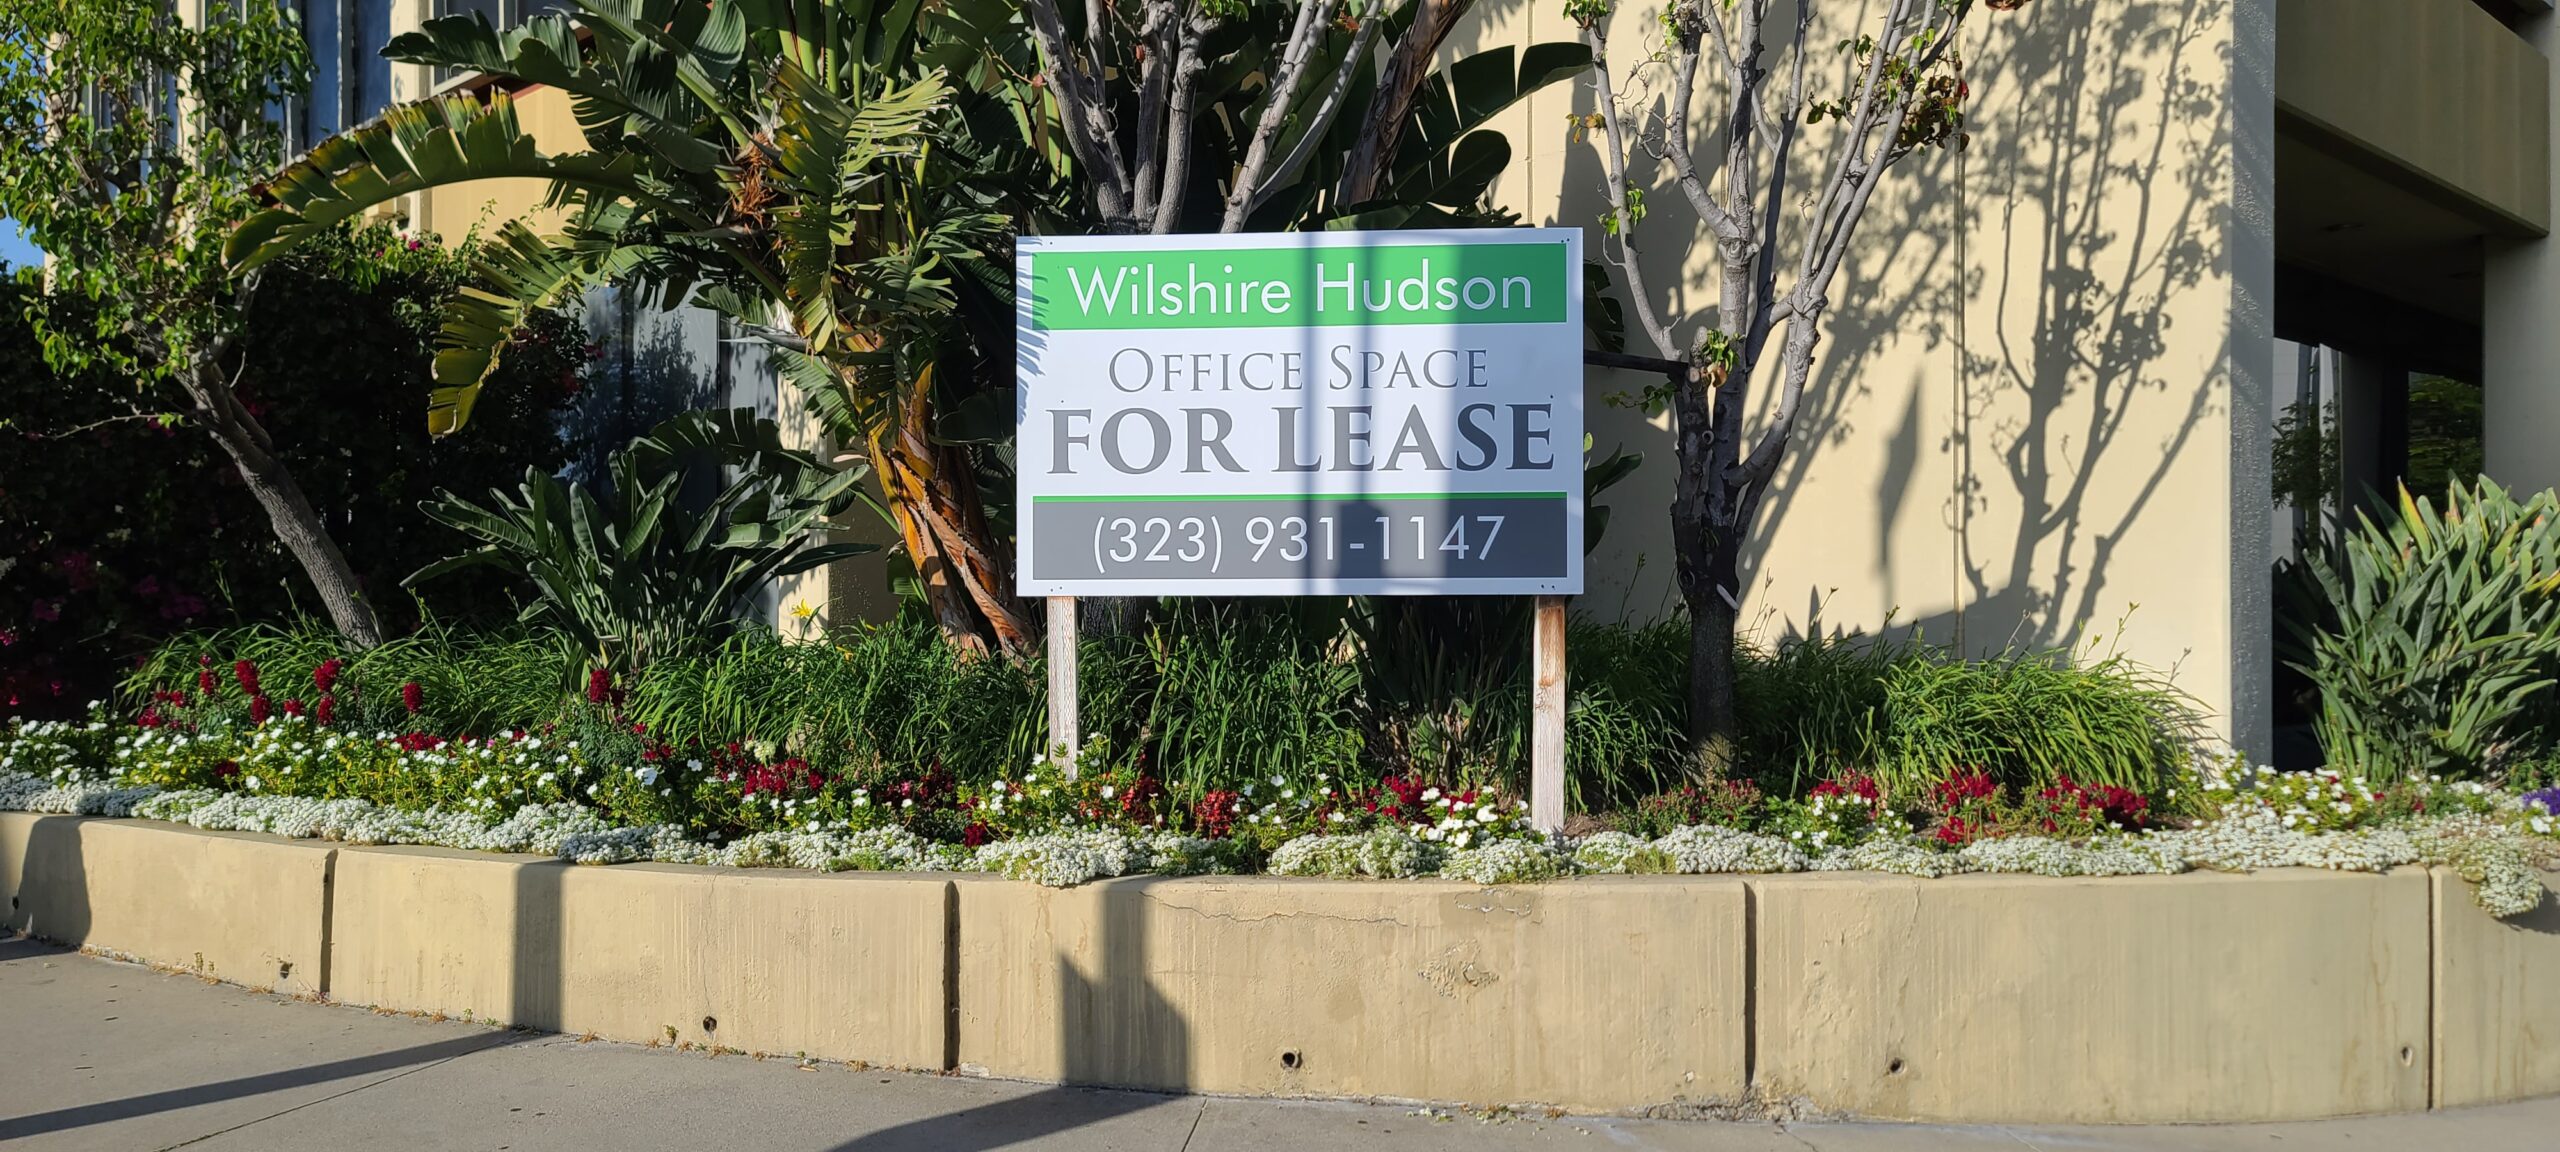 You are currently viewing “Office Space for Lease” Metal Panel Sign for Hankey Investment Company in Los Angeles